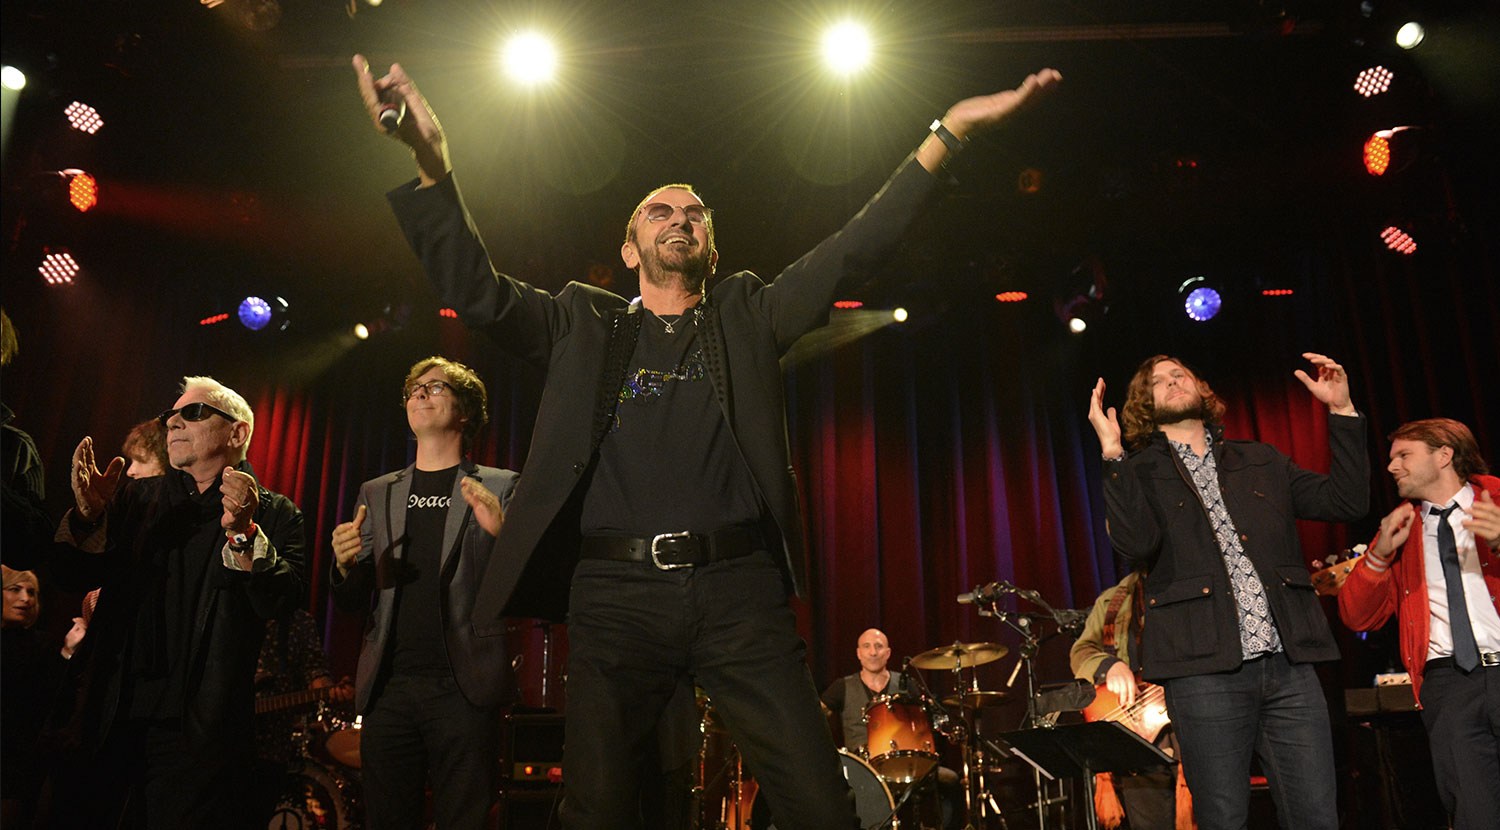 Ringo performs with the gang